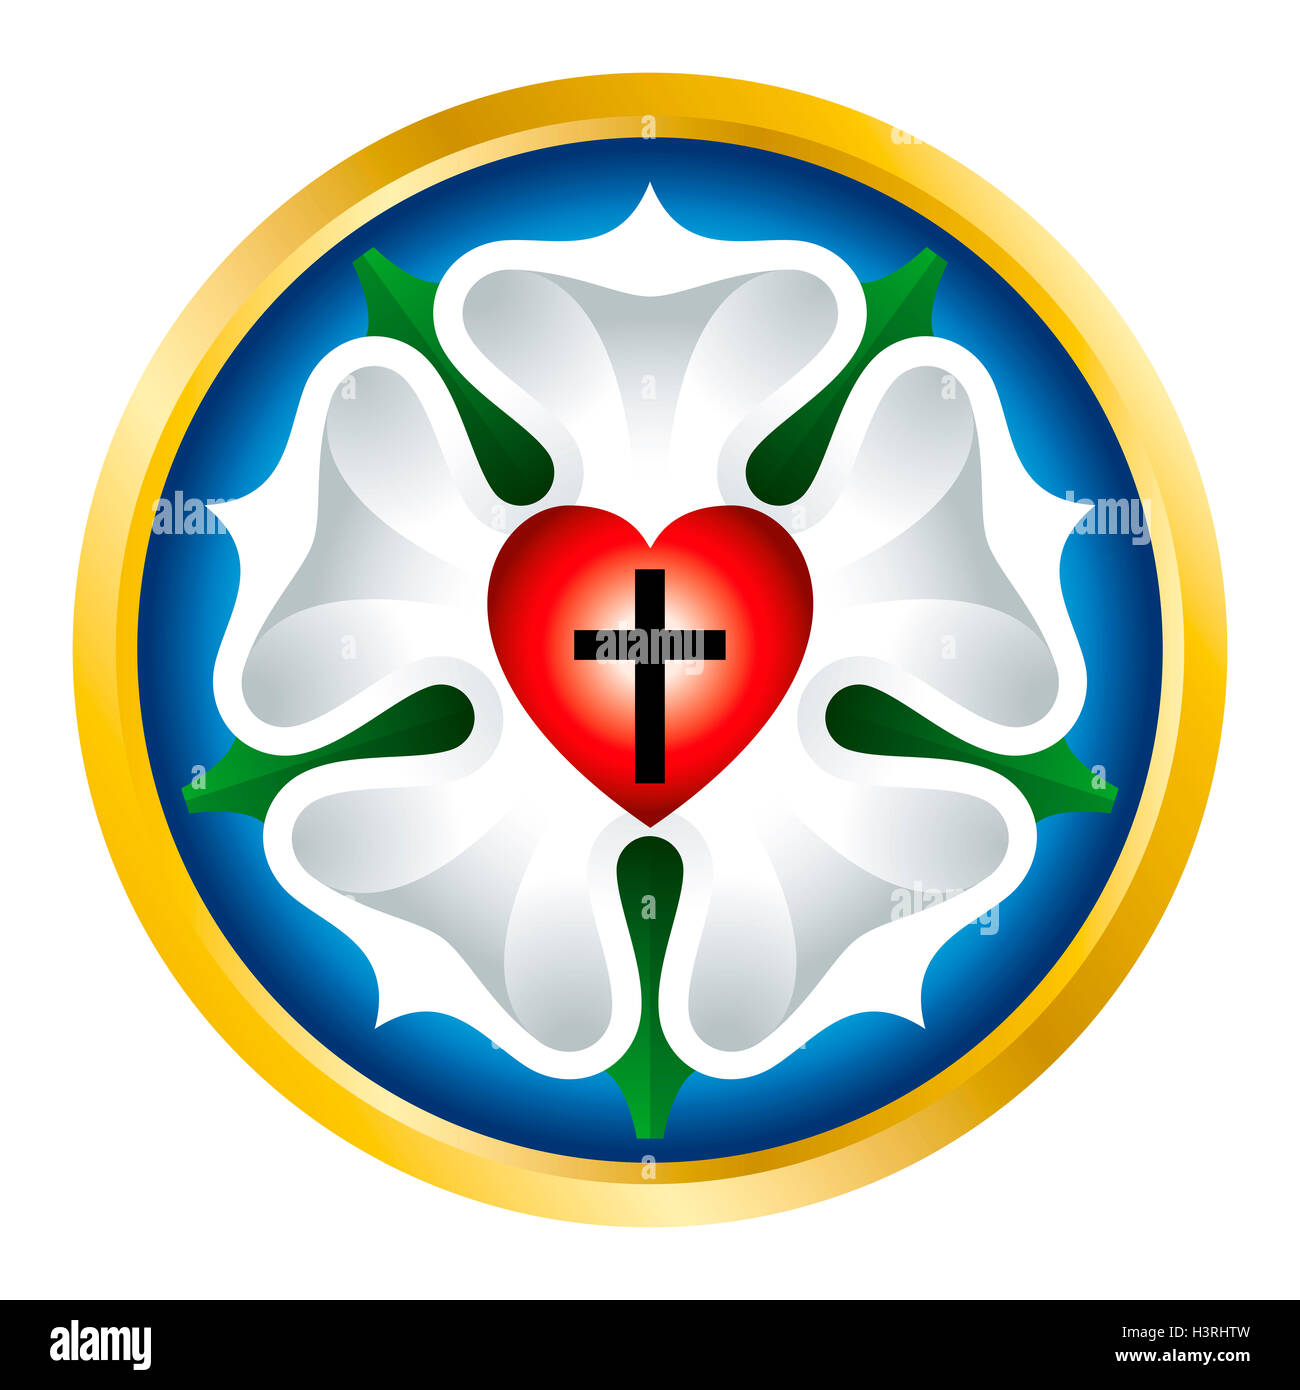 Luther rose, also Luther seal, symbol of Lutheranism, used by Martin Luther as an expression of his theology. Stock Photo